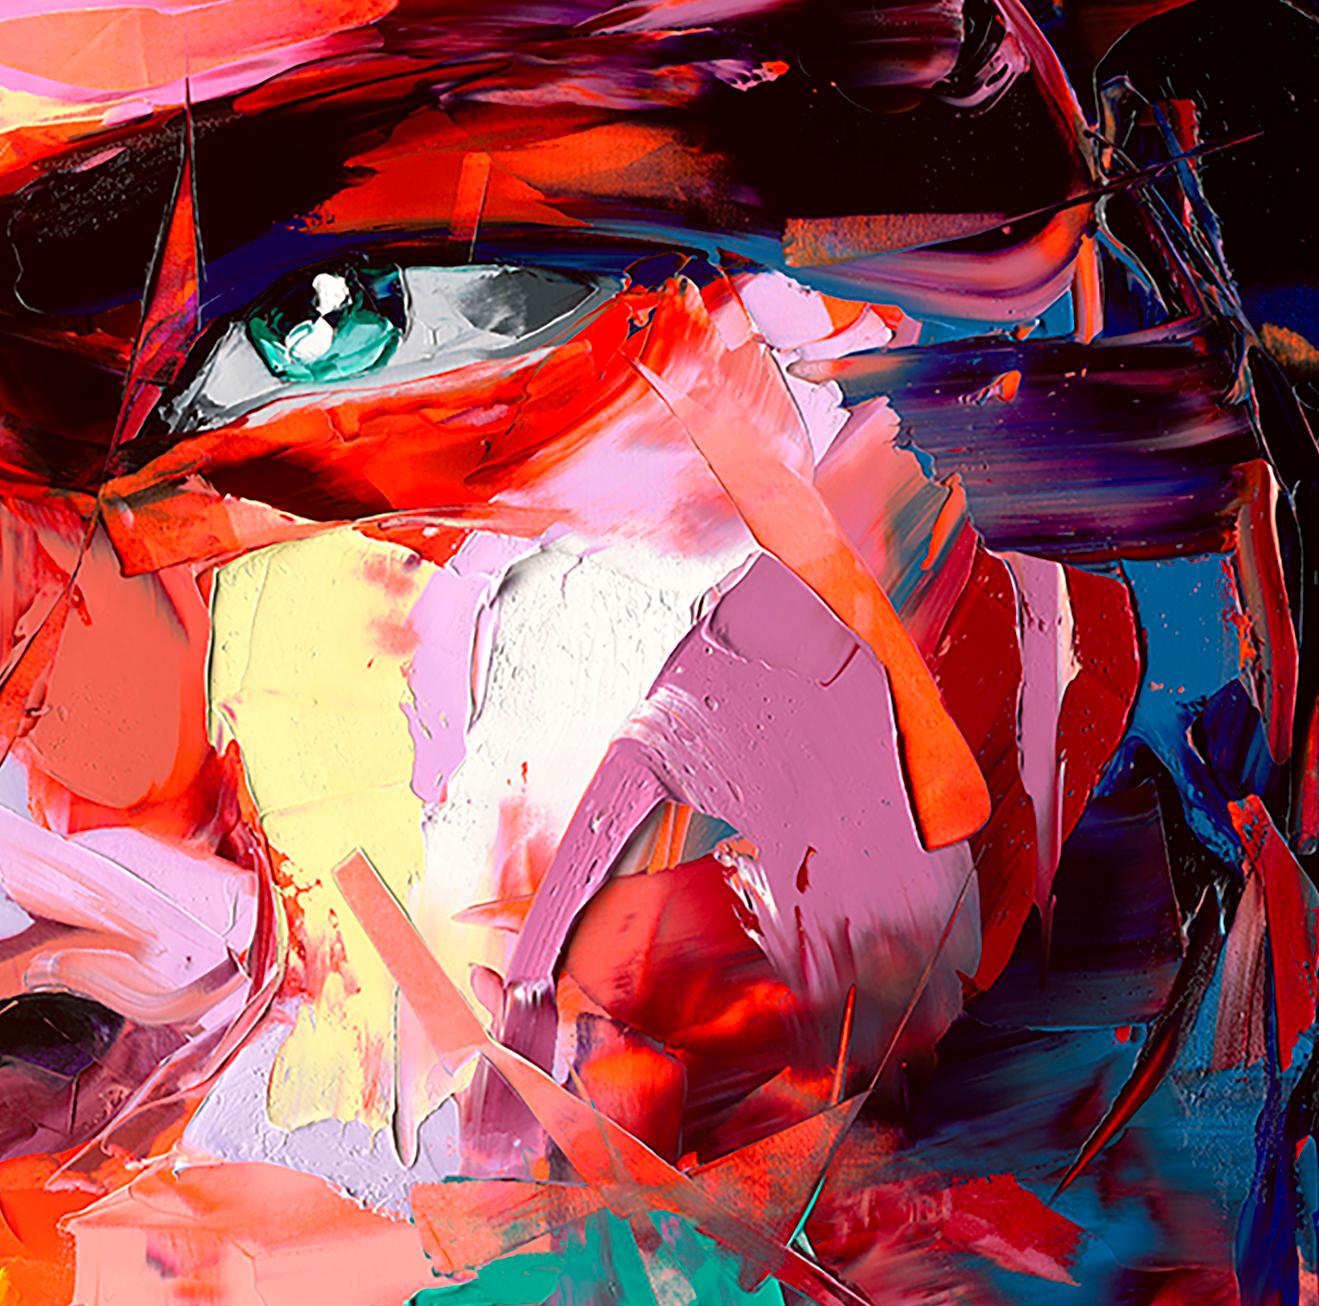 Edition of 50

The Françoise Nielly limited editions are available as pigment prints on aluminium: durable and colourfast hi-definition images with a smooth glass-like luminescent effect. 
​
They are available with a glossy, semi-gloss or matte